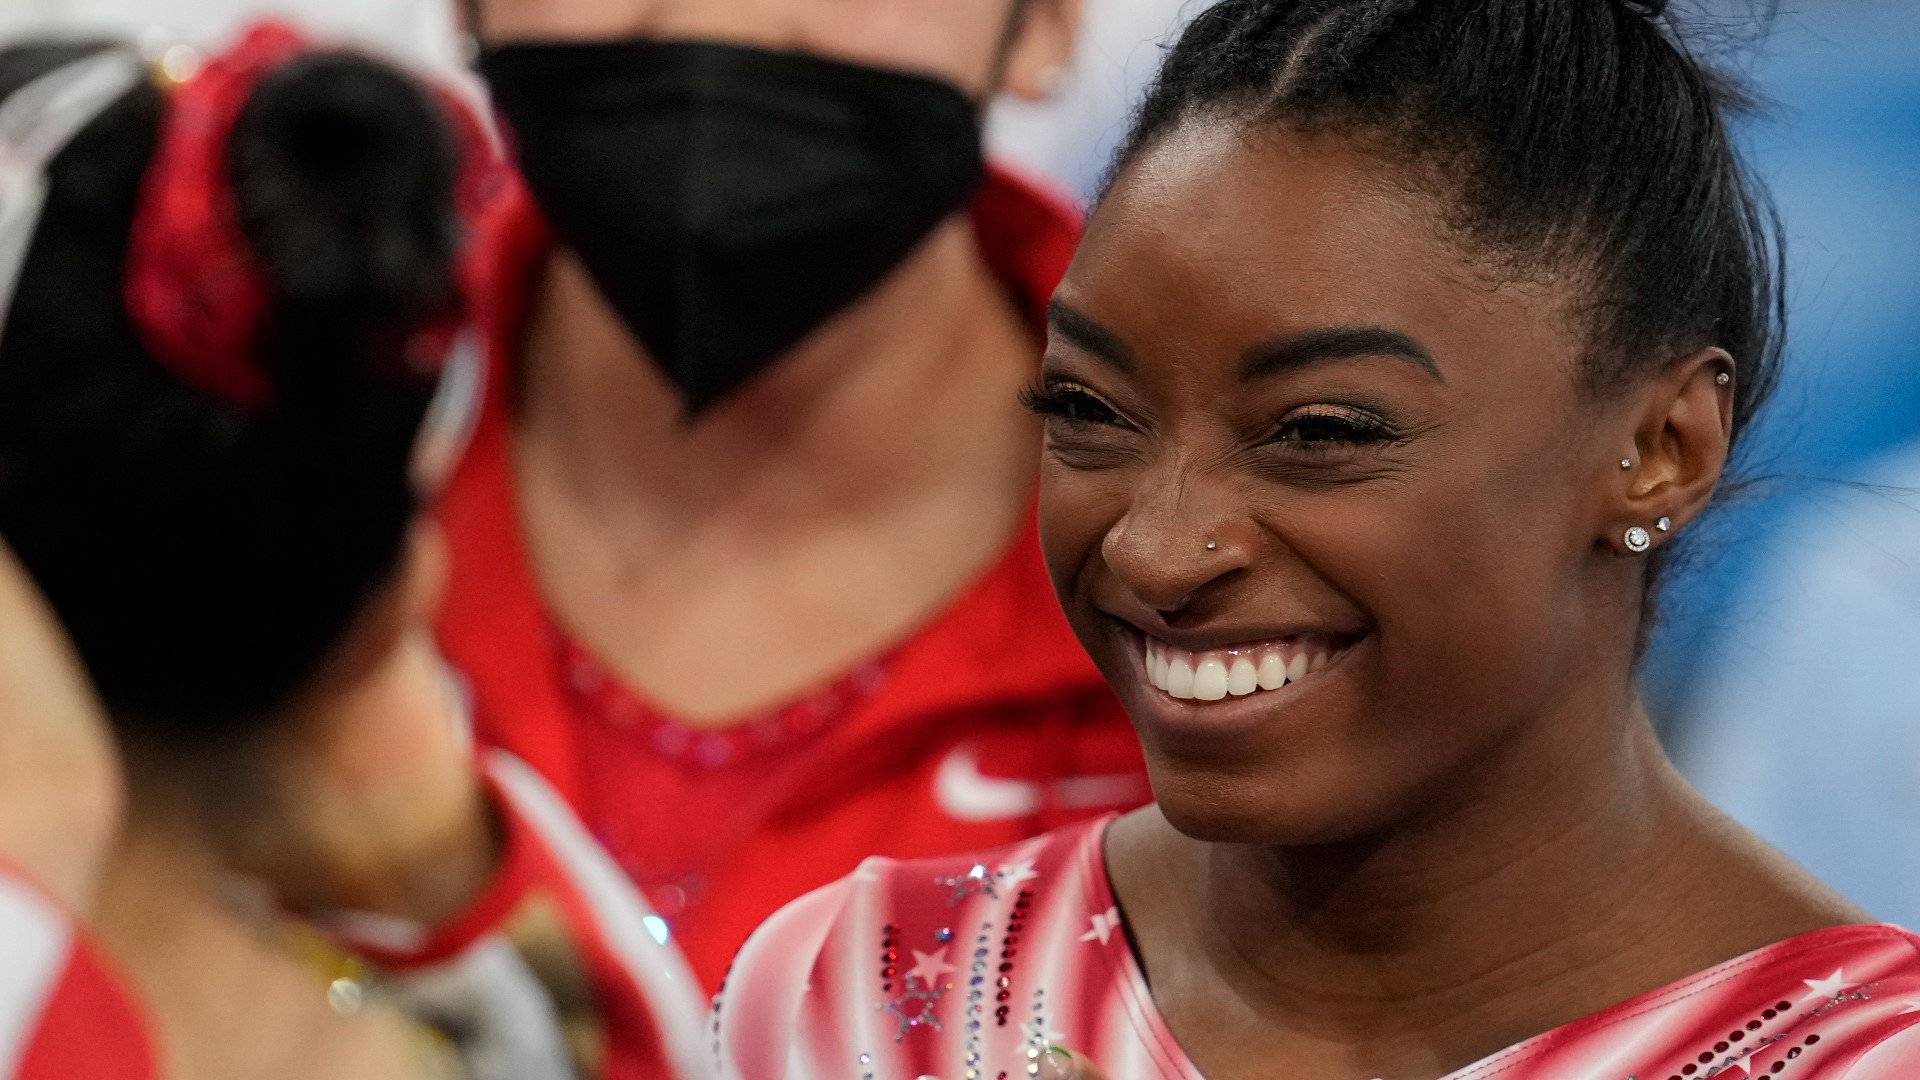 A week after taking herself out of several competitions to focus on her mental health, Biles drilled a slightly altered routine on Tuesday.